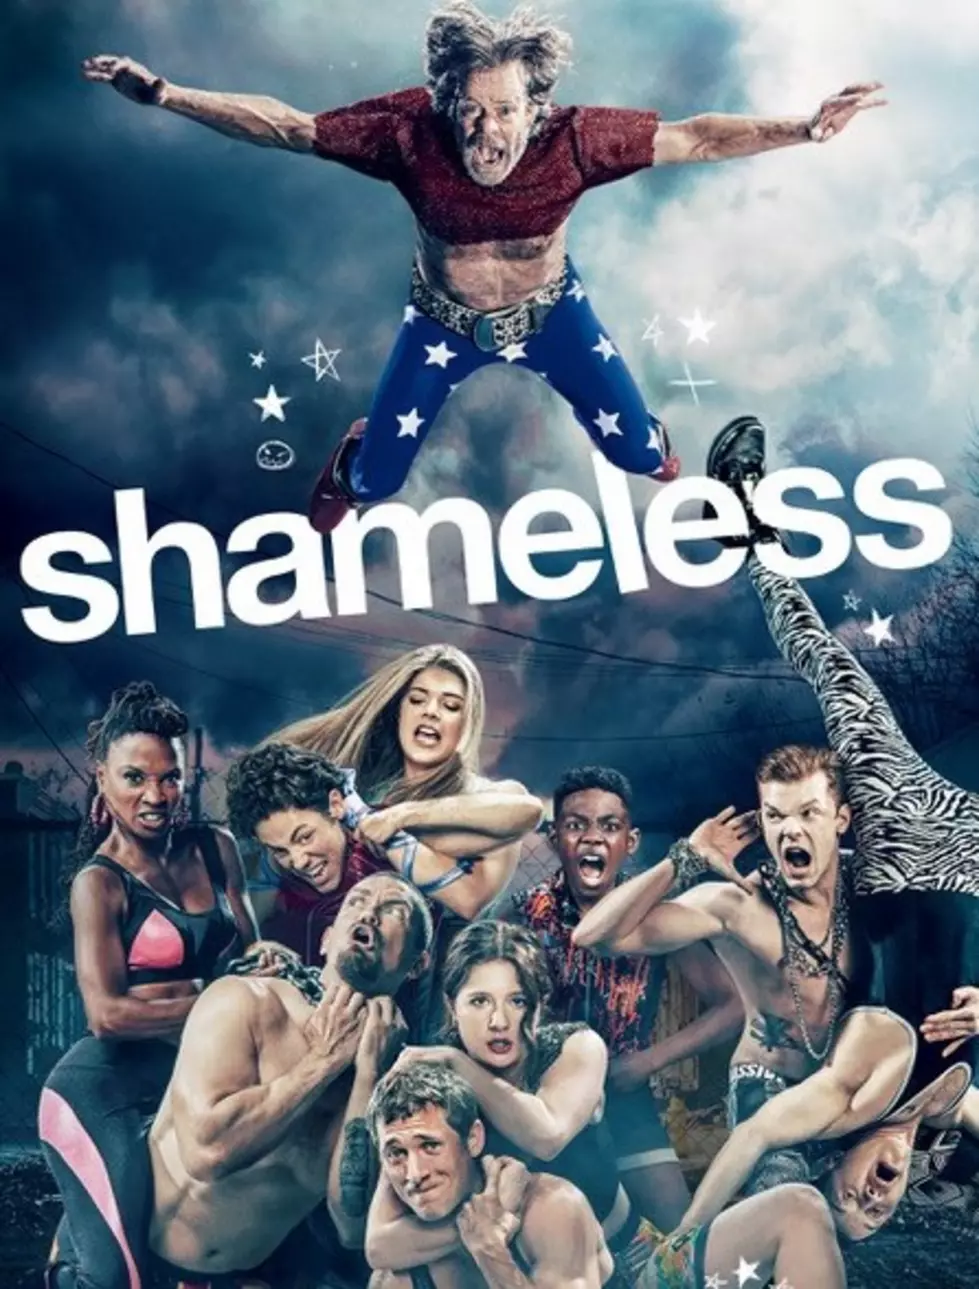 The Gallaghers Are Back for Season 10 of the hit Show &#8220;Shameless&#8221;